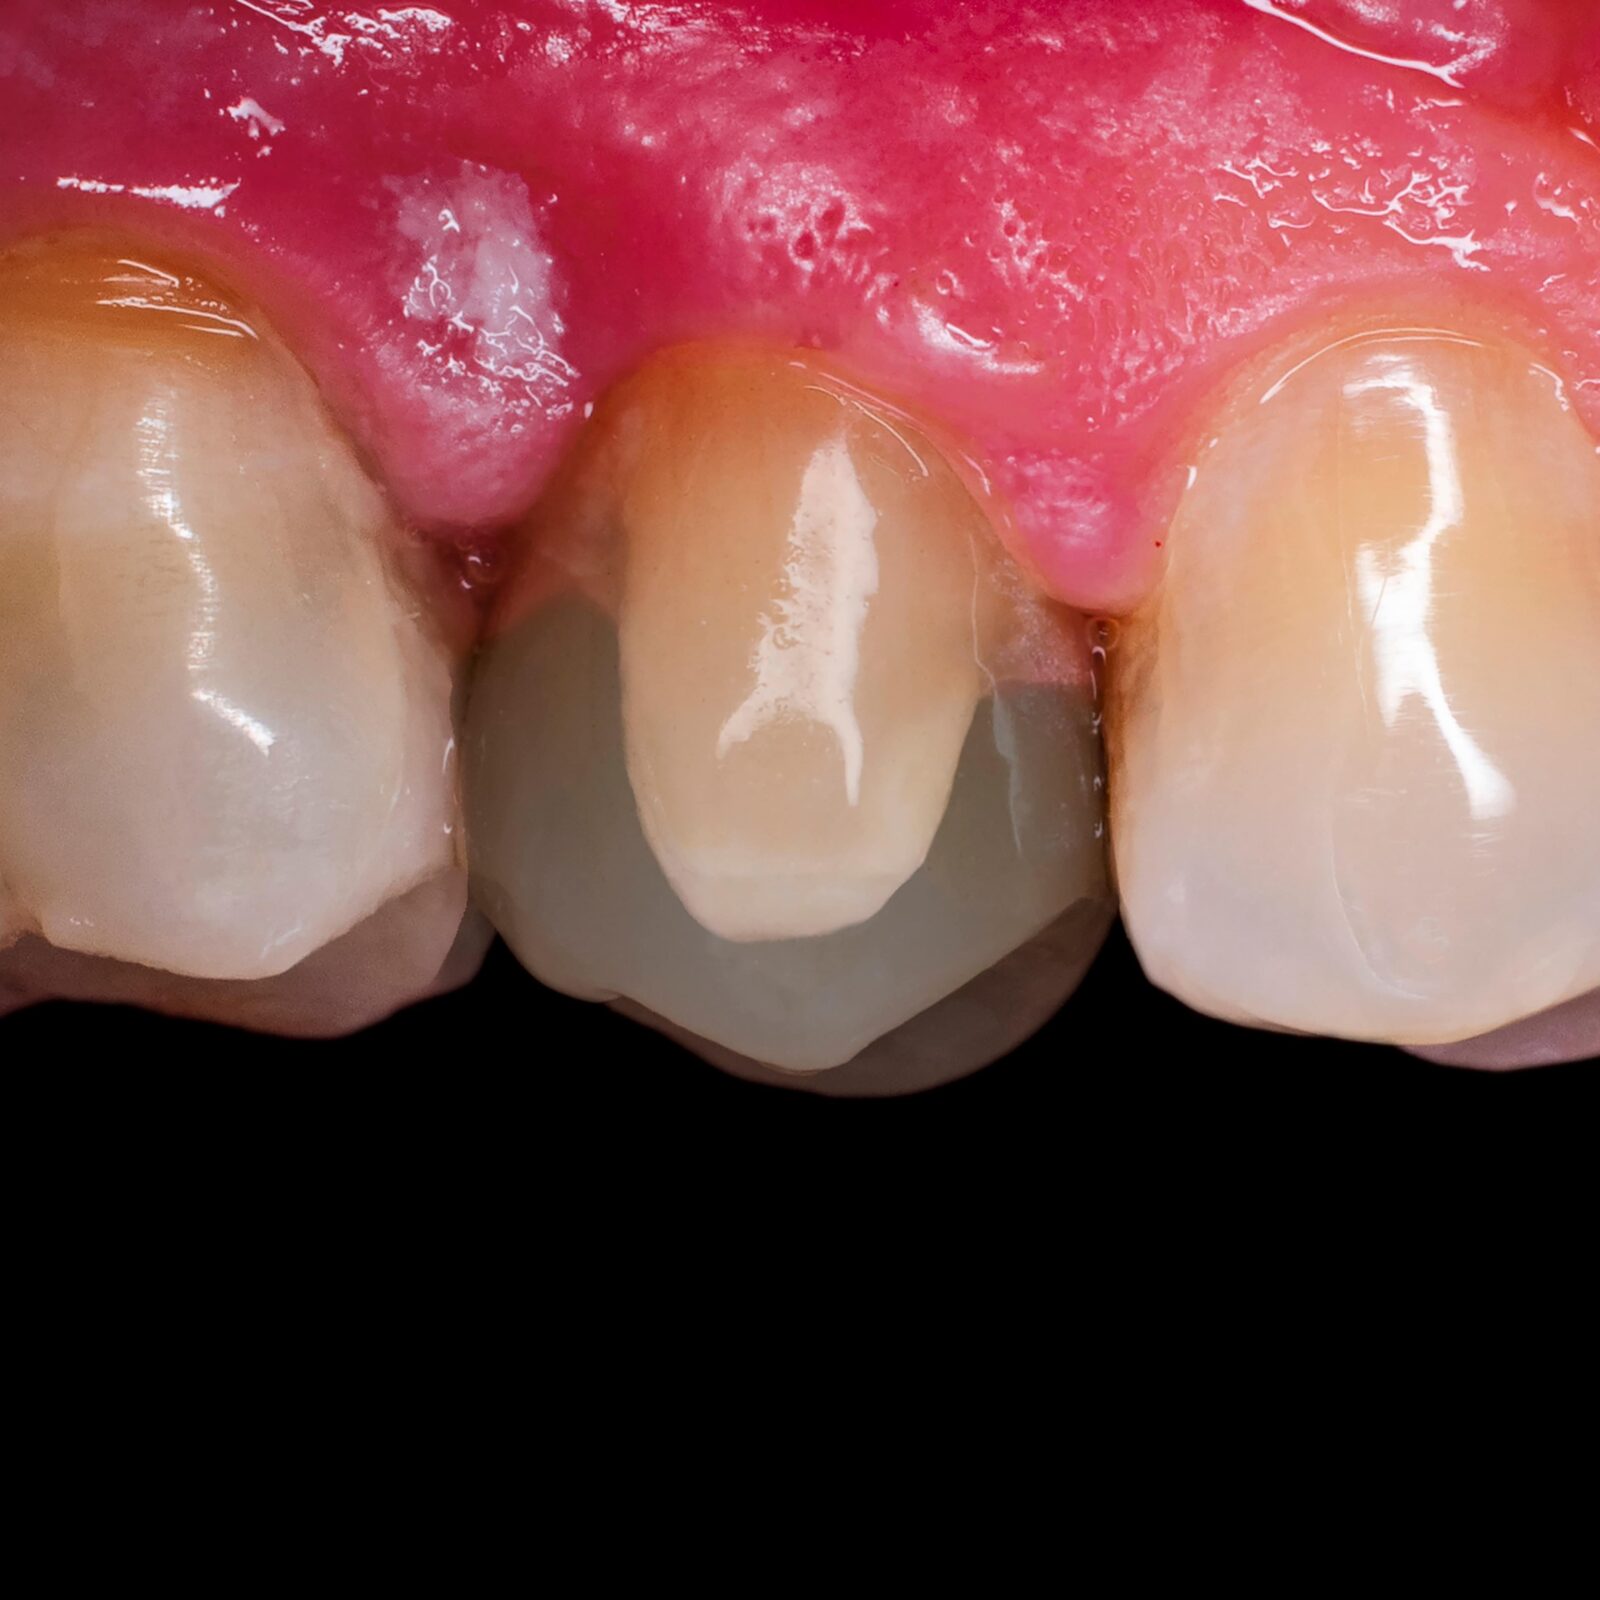 shaded full sized tooth restoration shown over a broken tooth piece